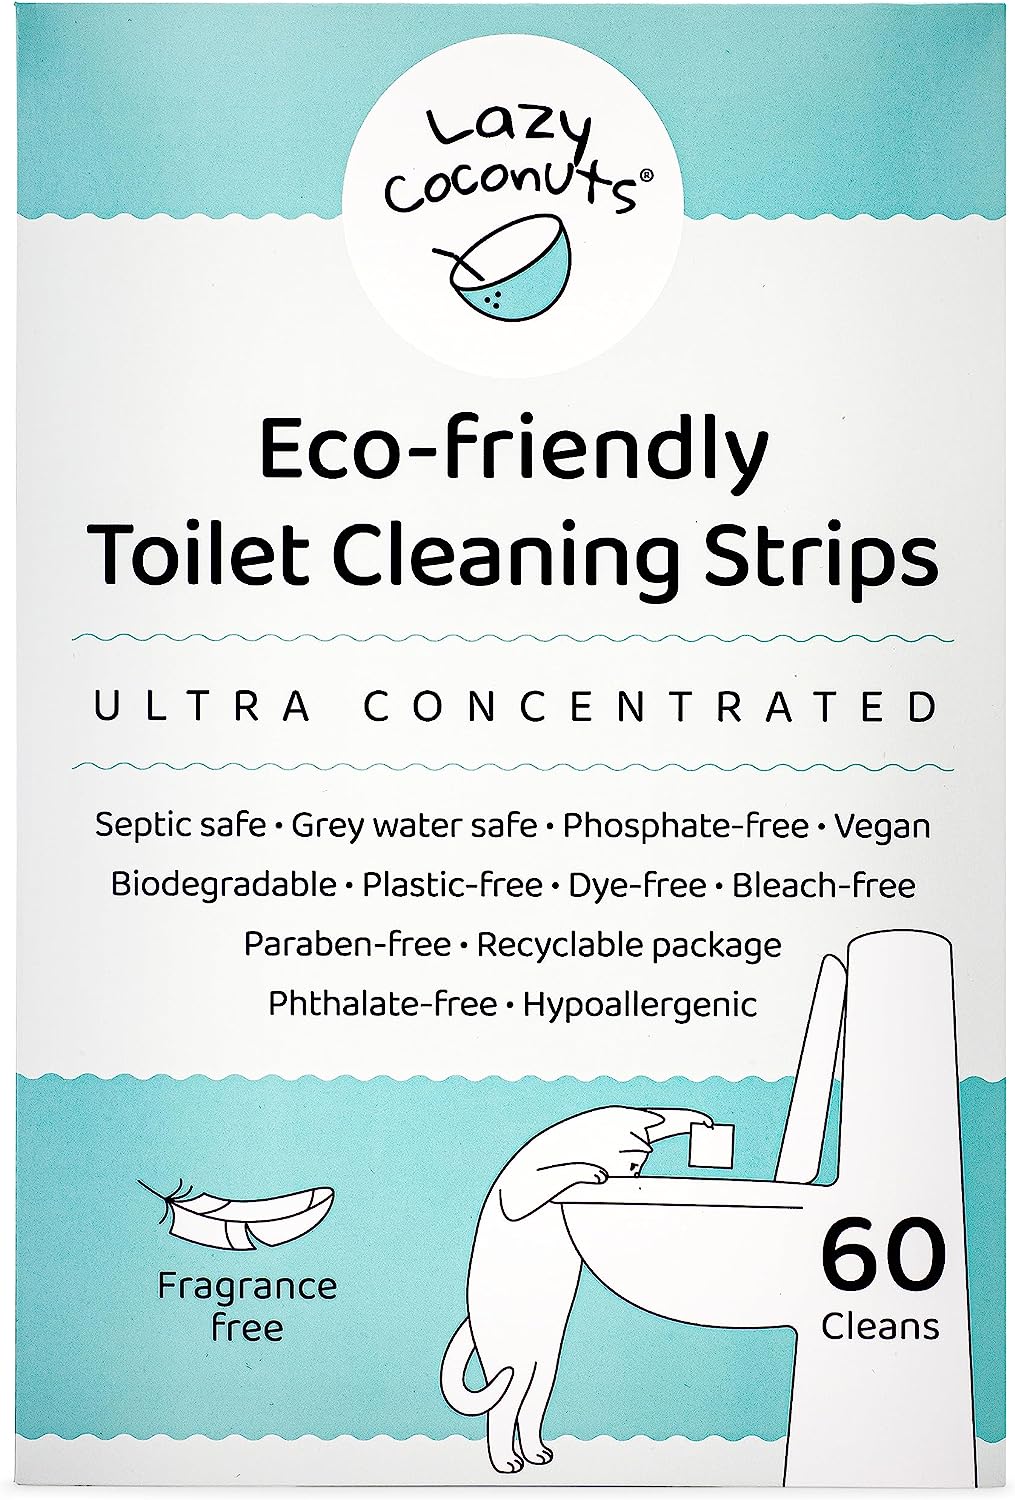 Lazy Coconuts Toilet Bowl Cleaner Strips - Eco- [...]